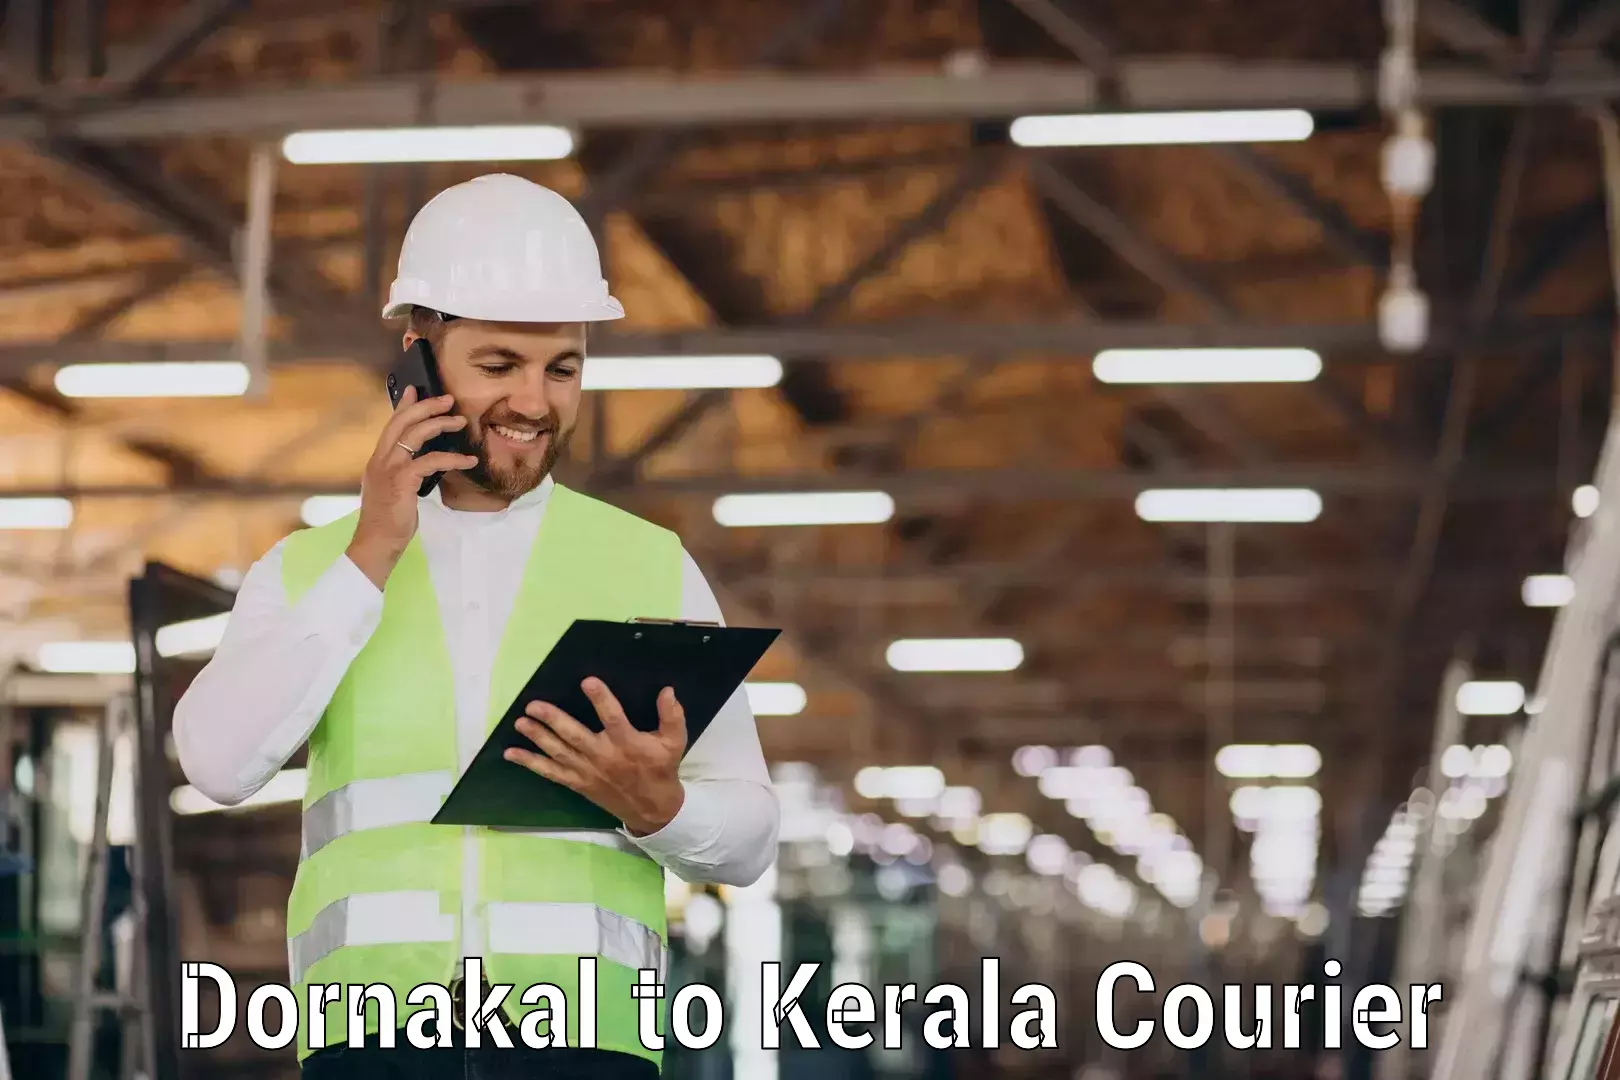 Easy access courier services Dornakal to Edappal